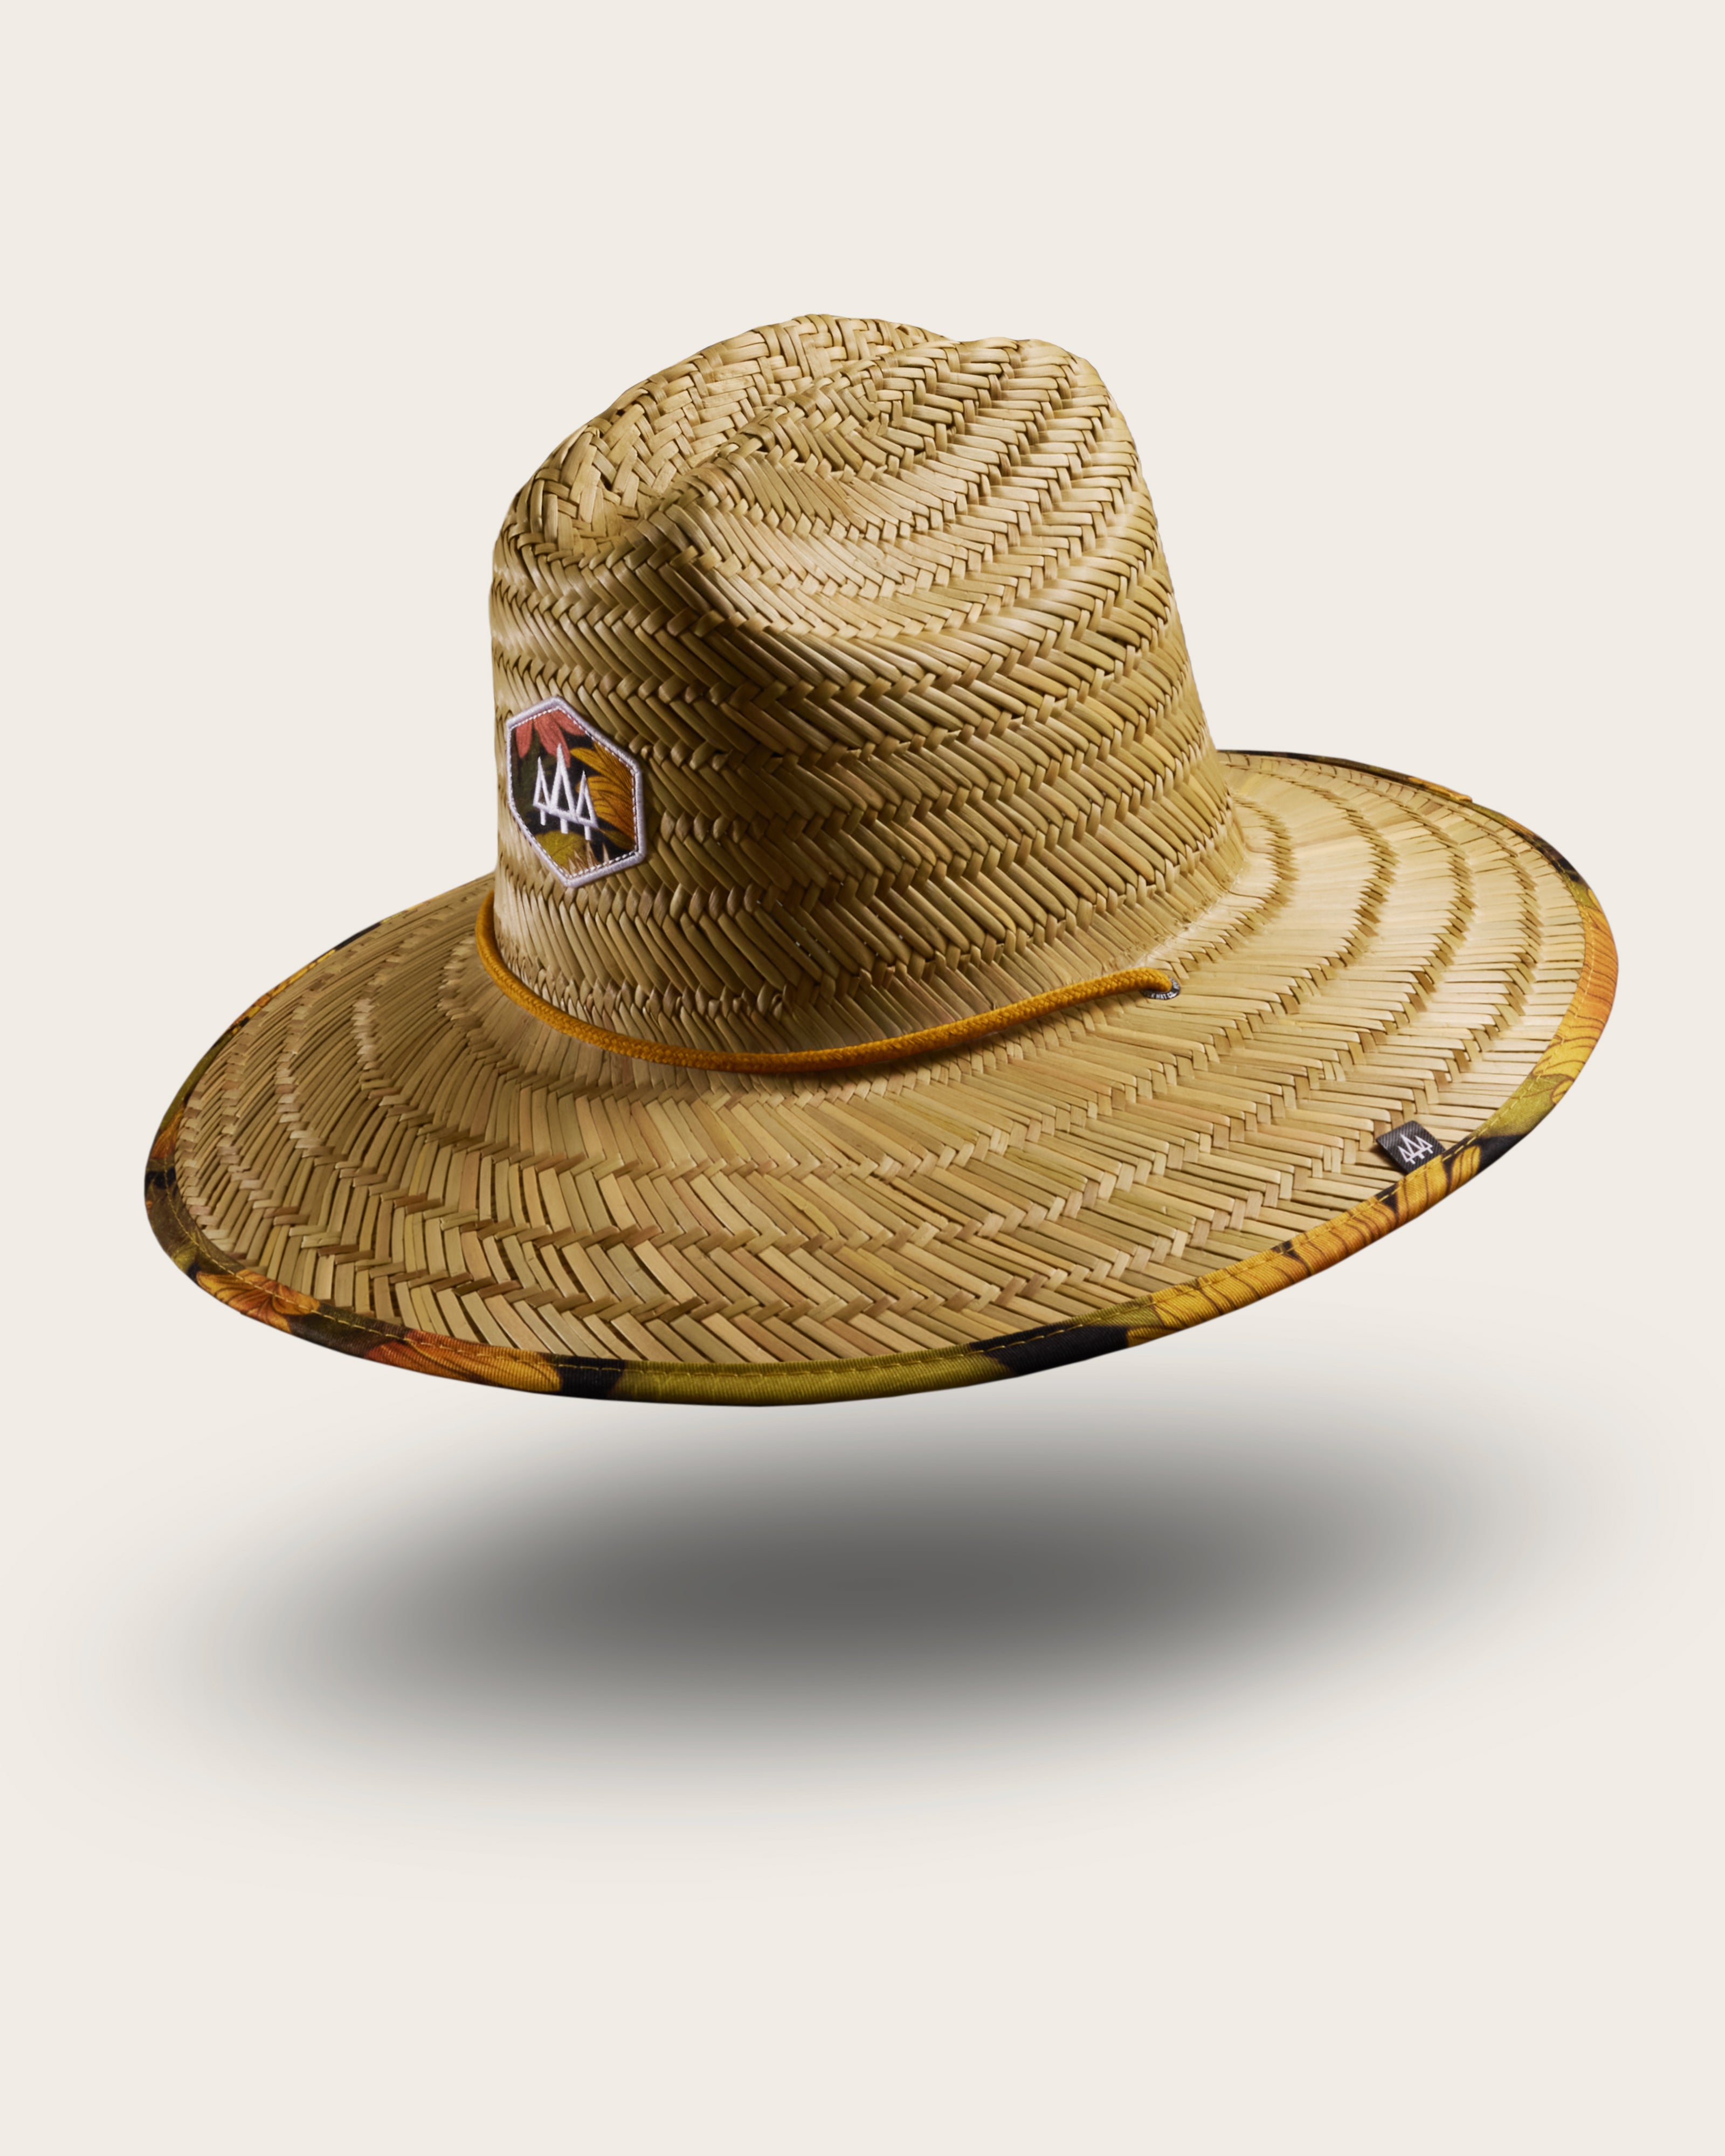 Hemlock Woodstock straw lifeguard hat with sunflower pattern with patch